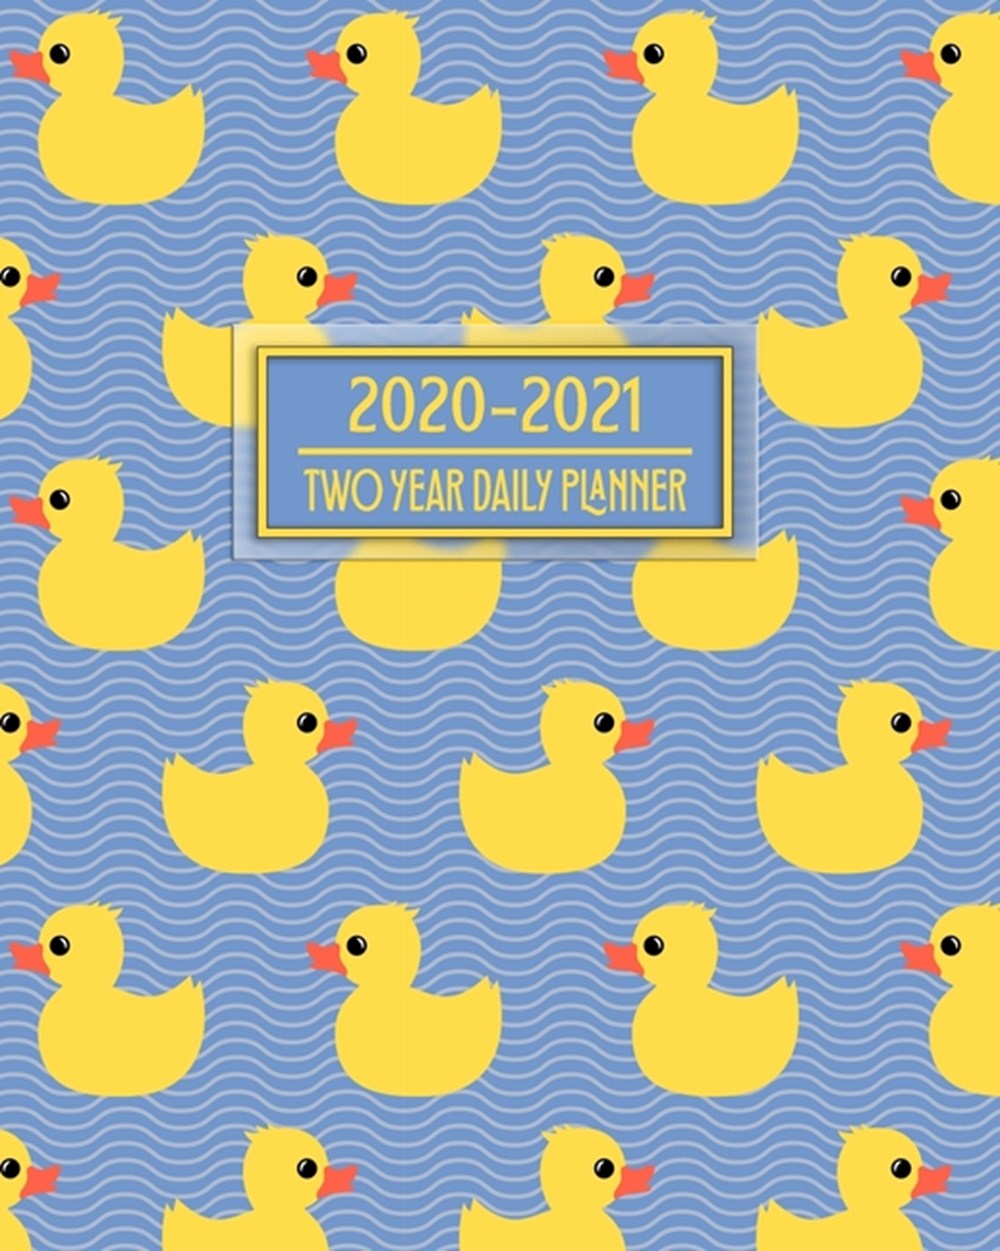 2020-2021 Two Year Daily Planner Sweet Yellow Rubber Ducks Great Gift for Parents Newborns Infants T